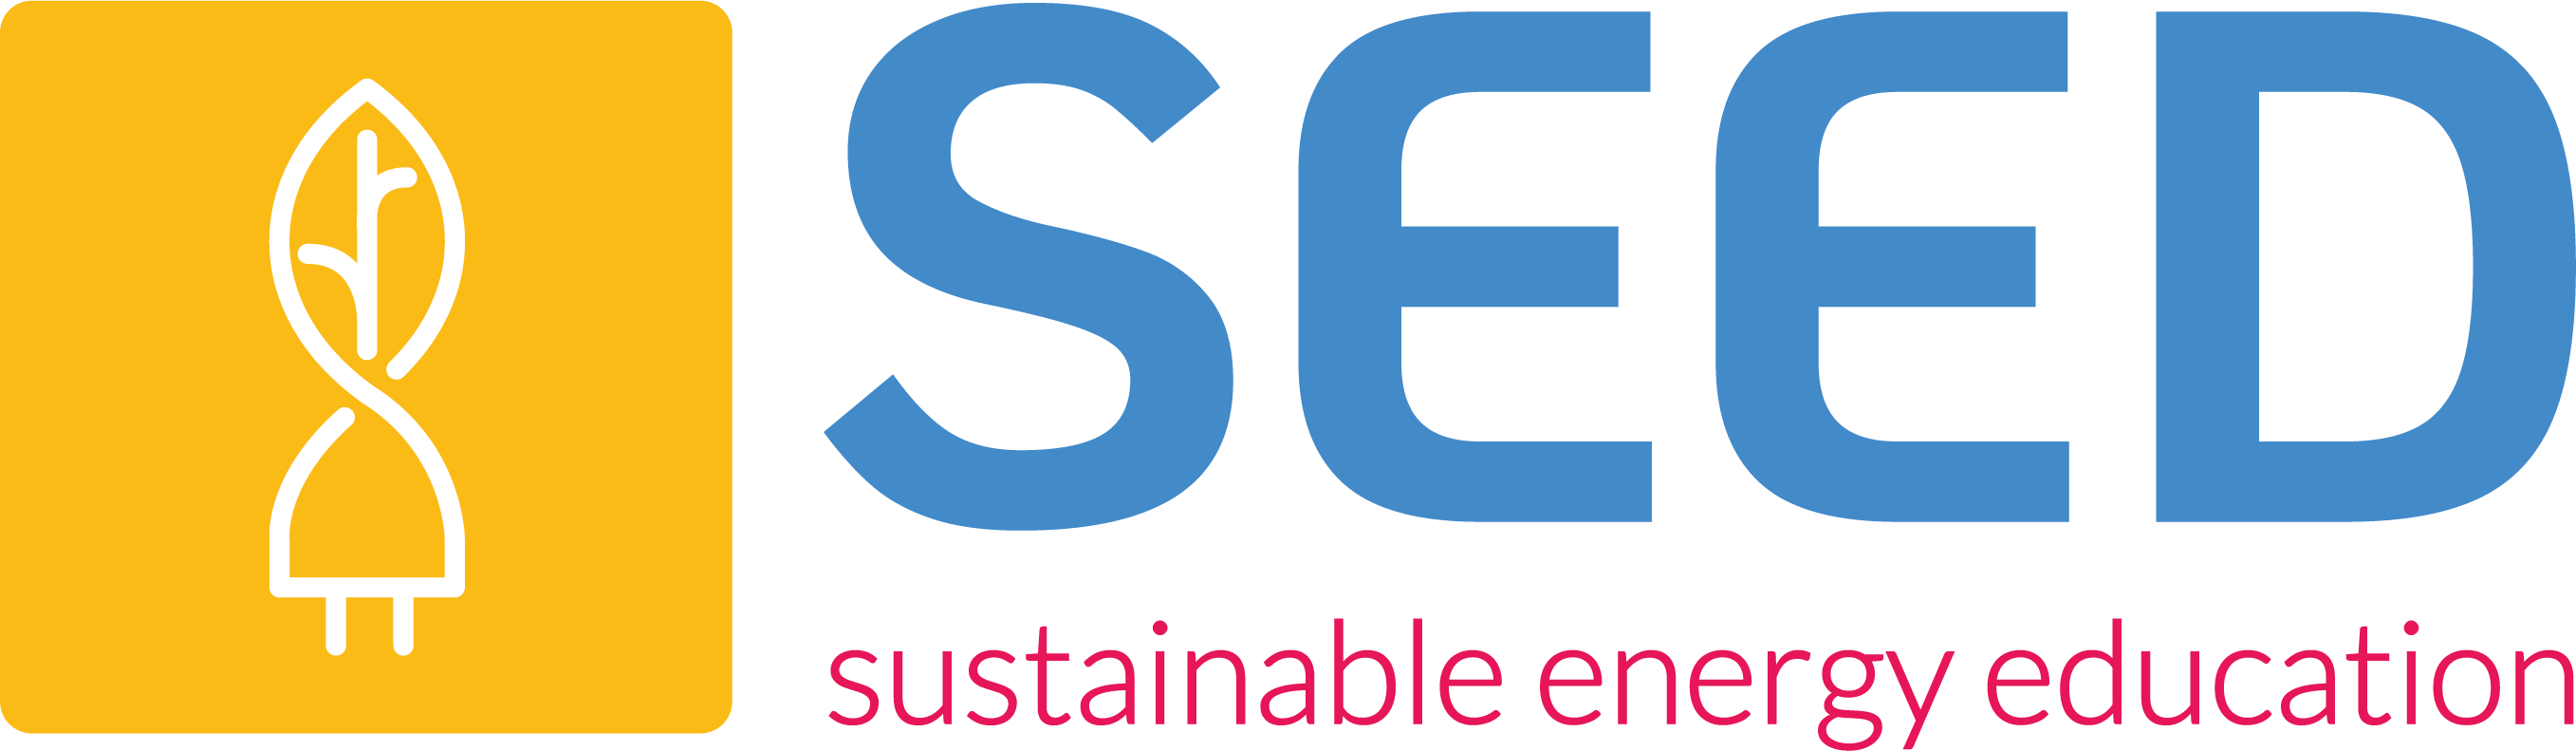 seed-logo-color